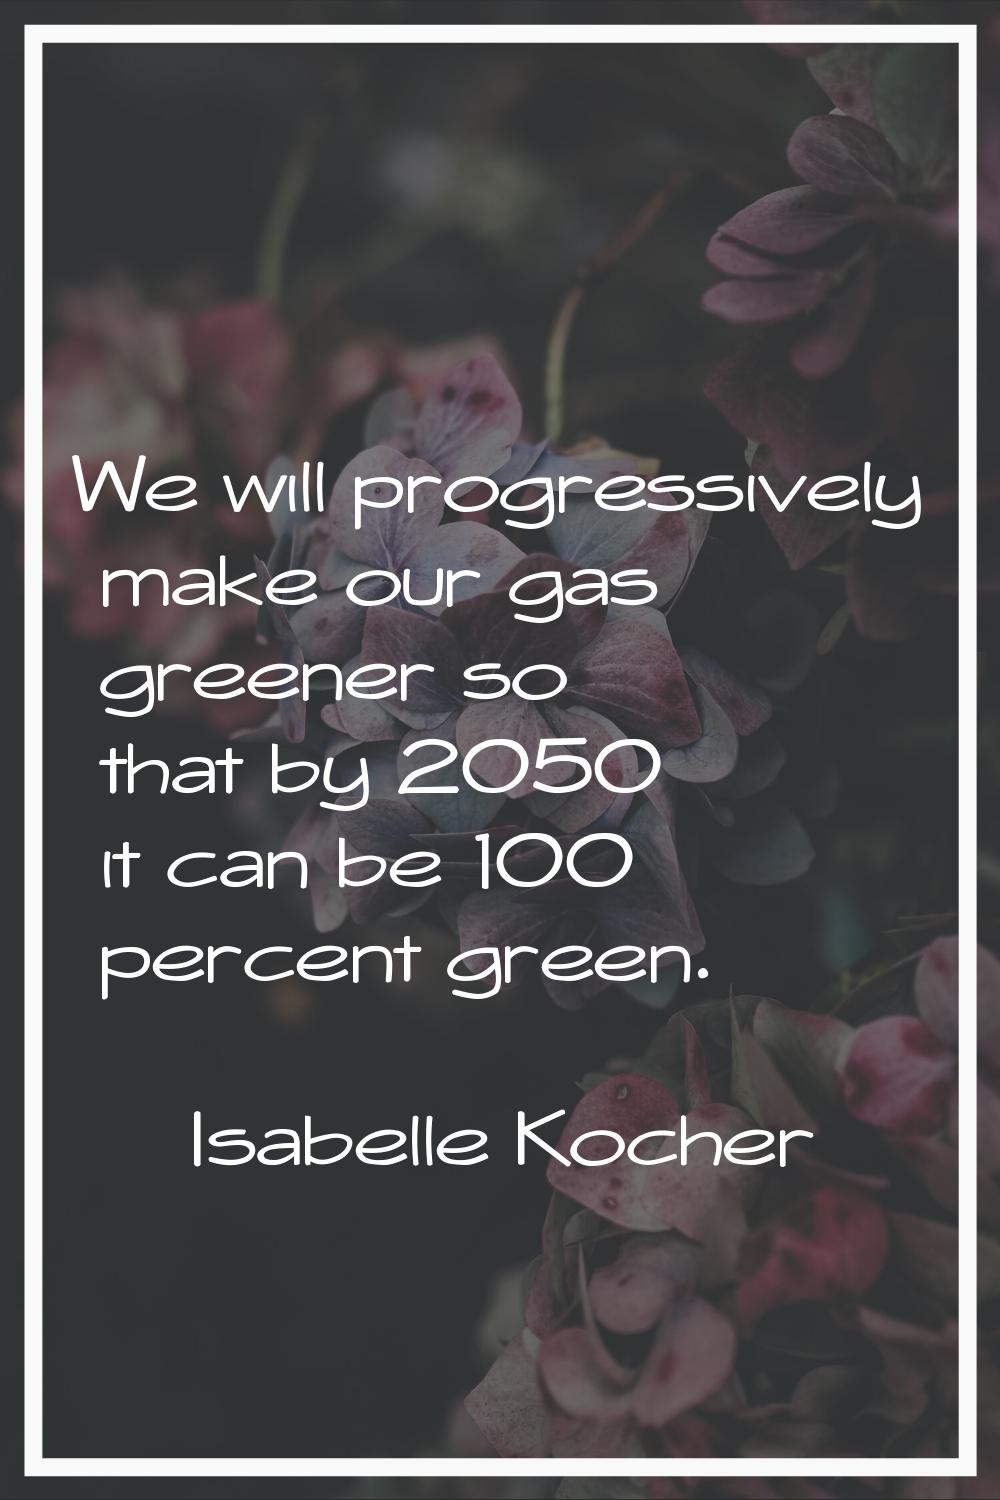 We will progressively make our gas greener so that by 2050 it can be 100 percent green.